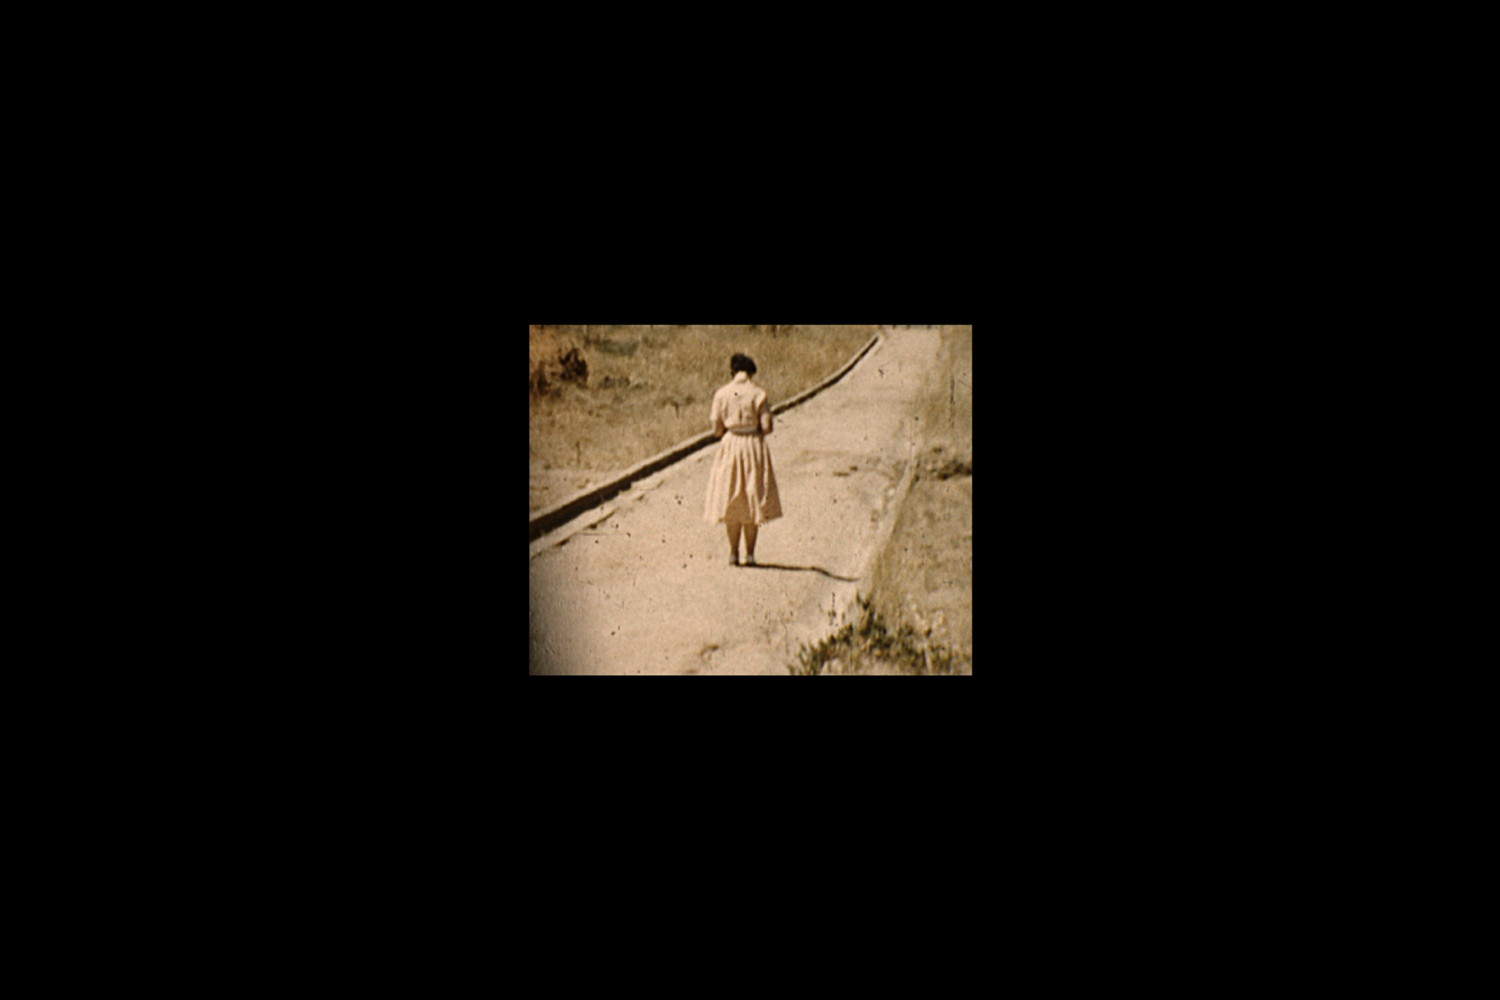 Colour photograph depicting a projected archival sepia image of a woman standing on a dirt path.